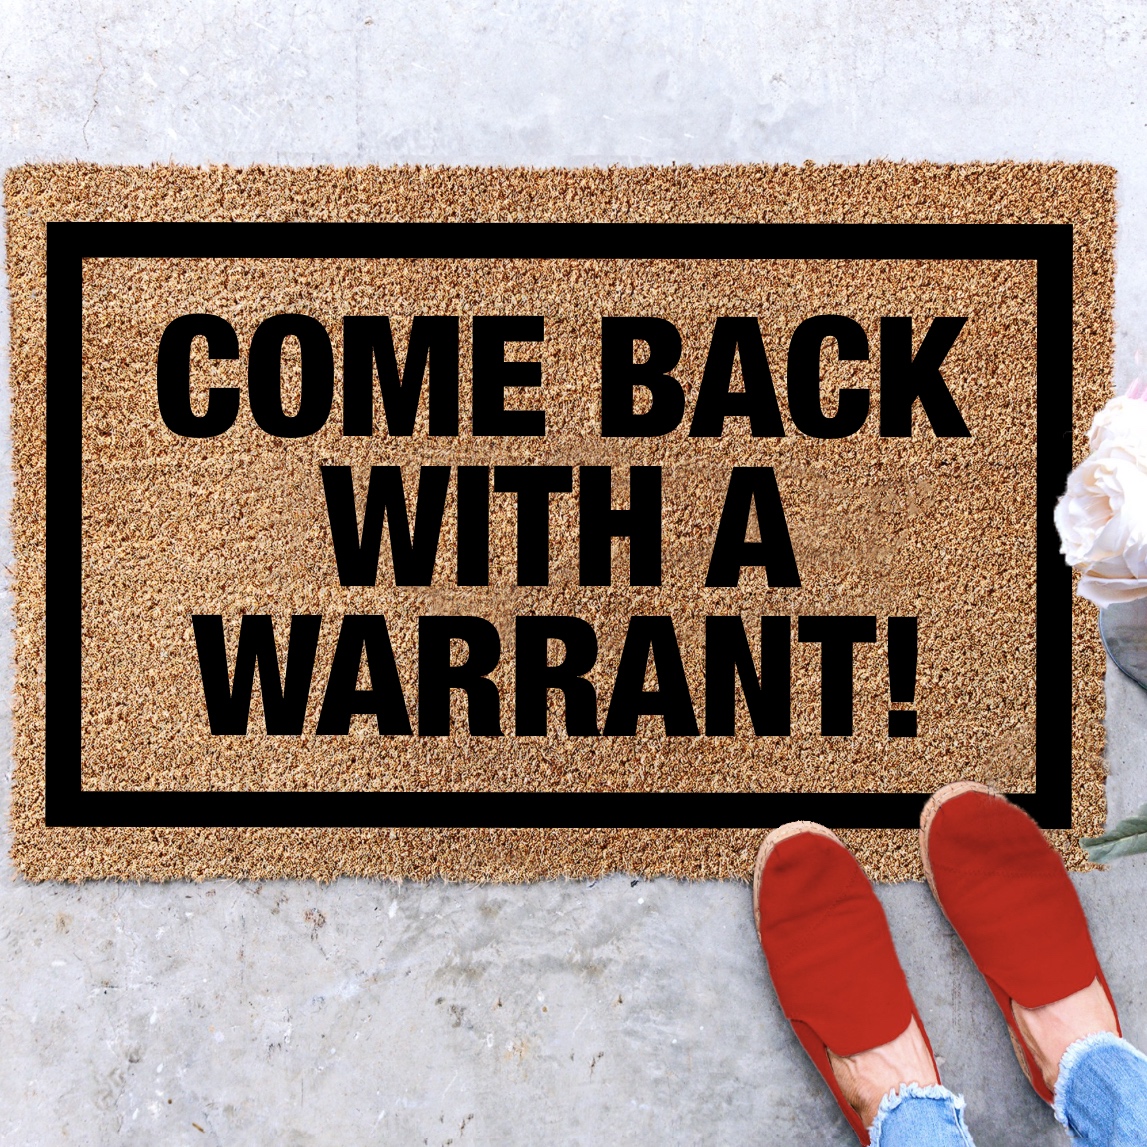 Come Back with a Warrant funny doormat